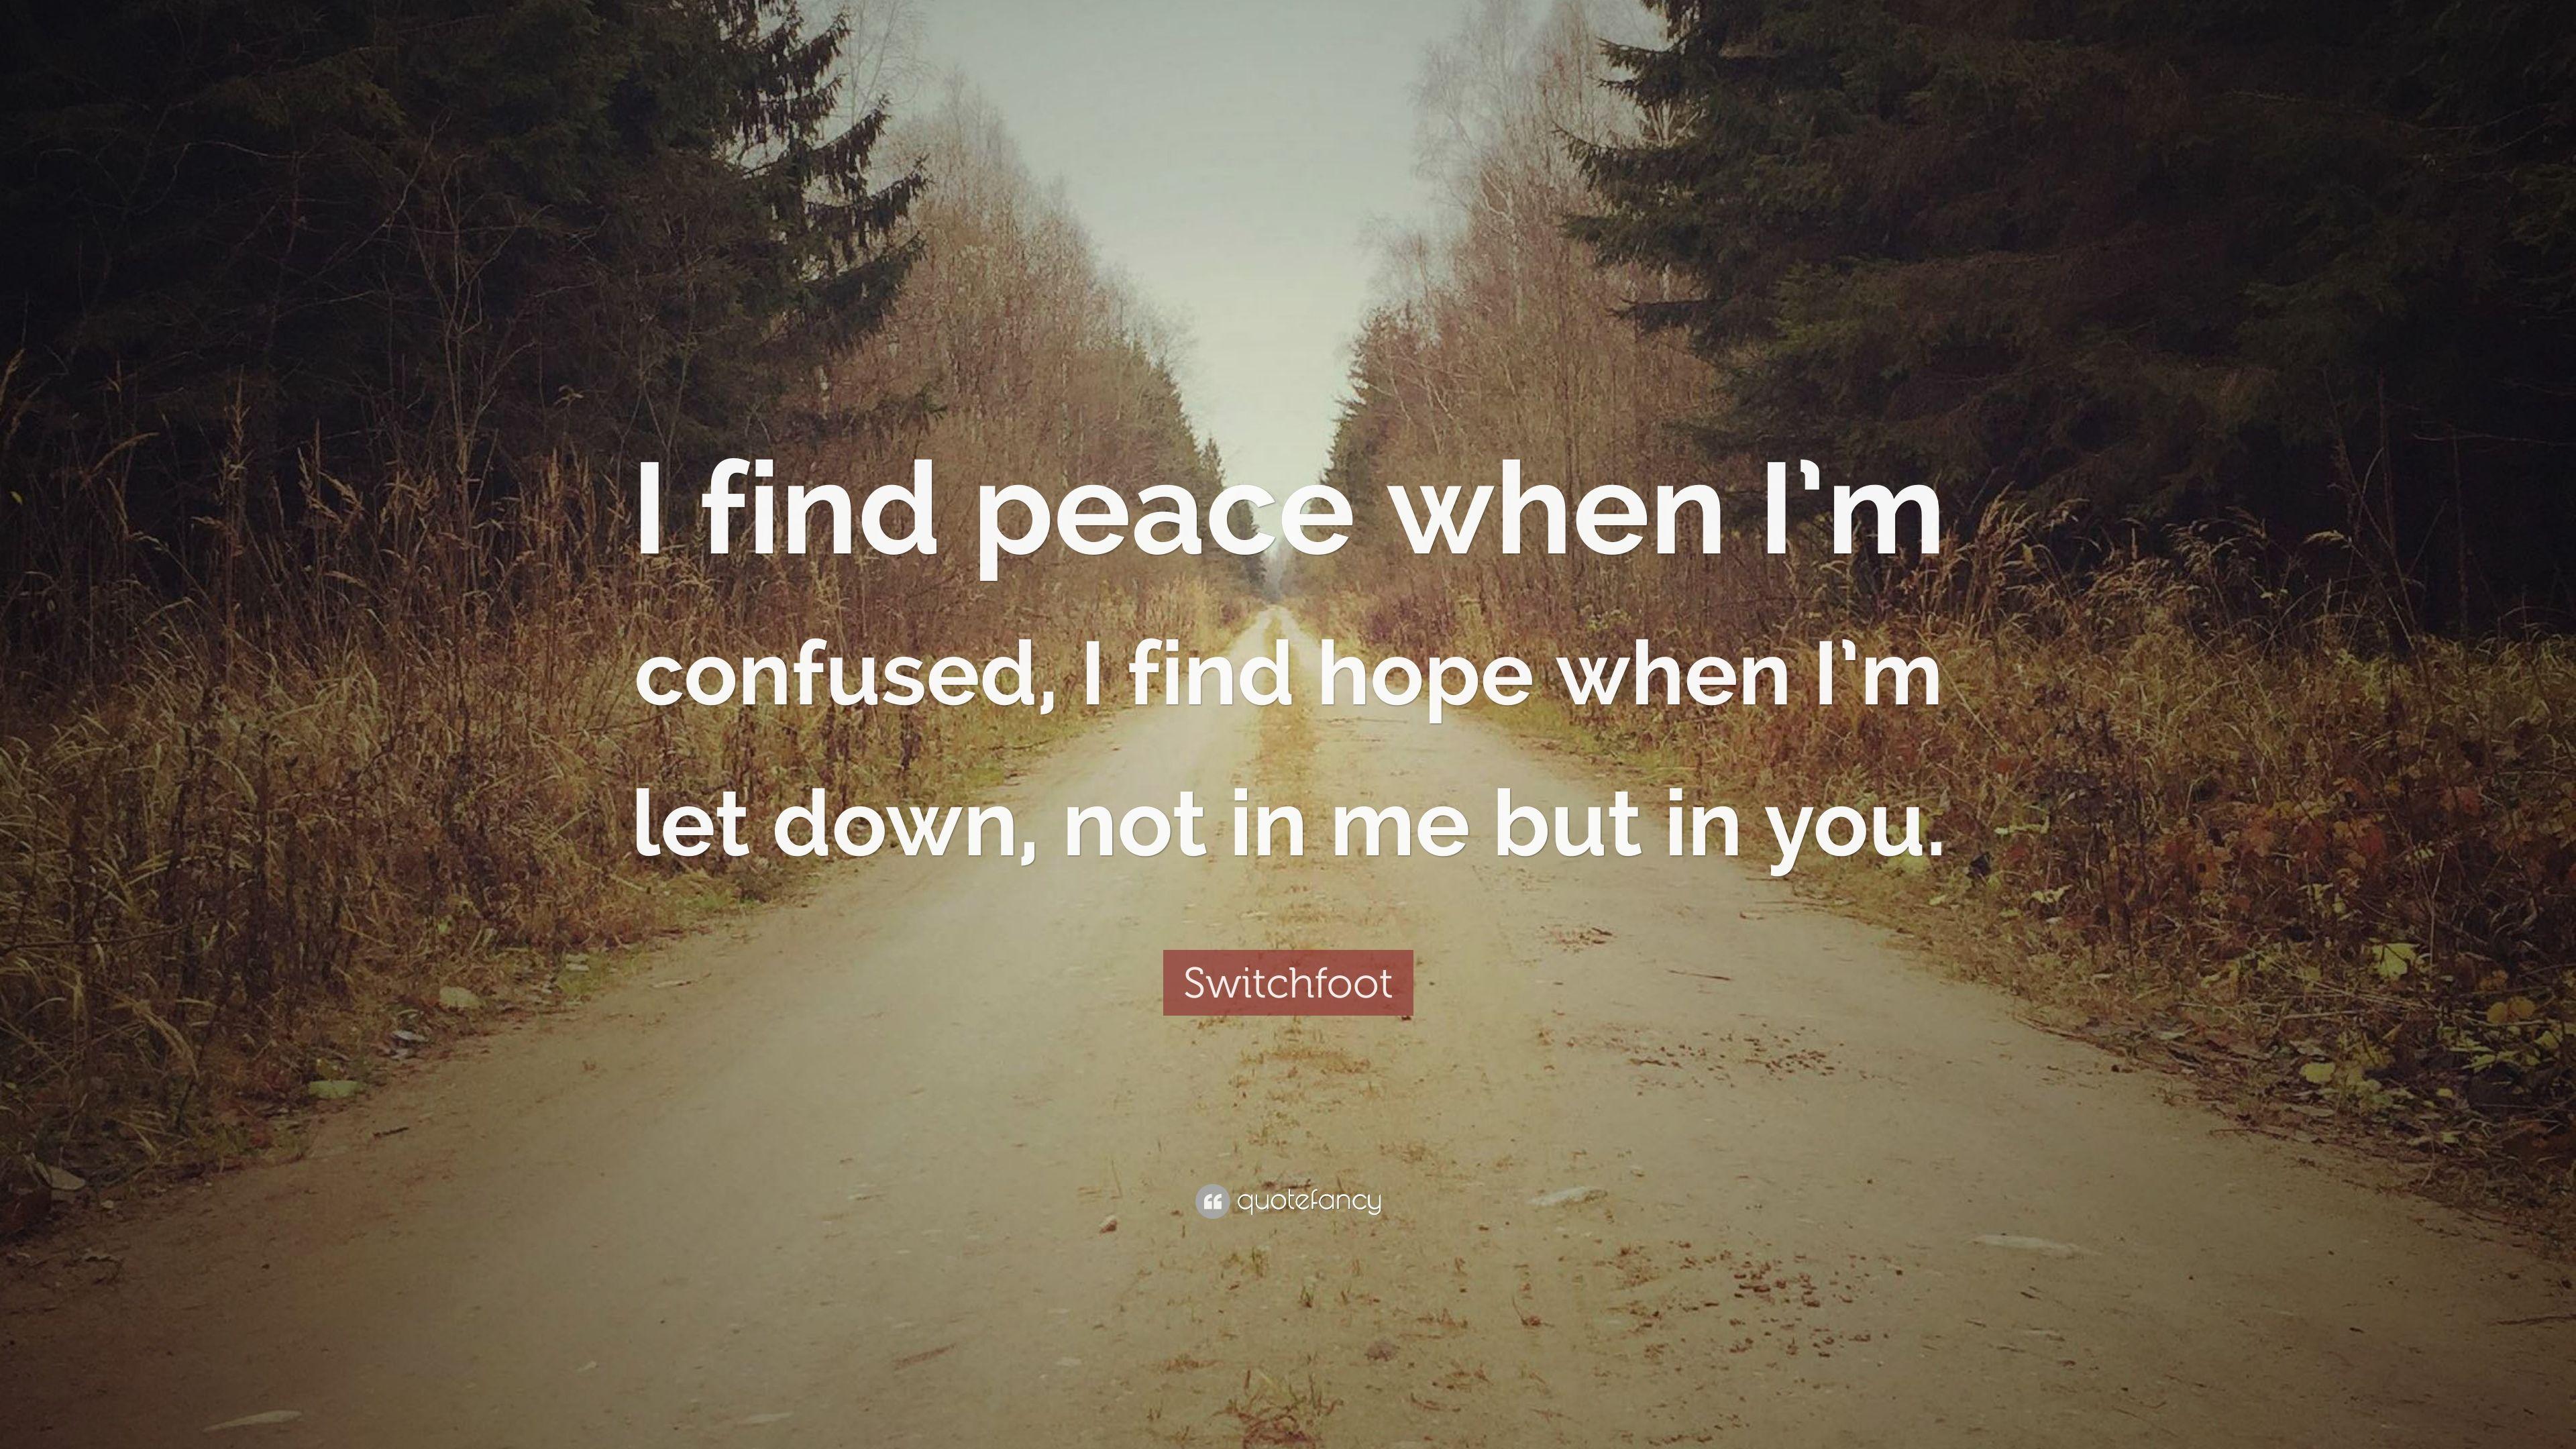 Switchfoot Quote: “I find peace when I'm confused, I find hope